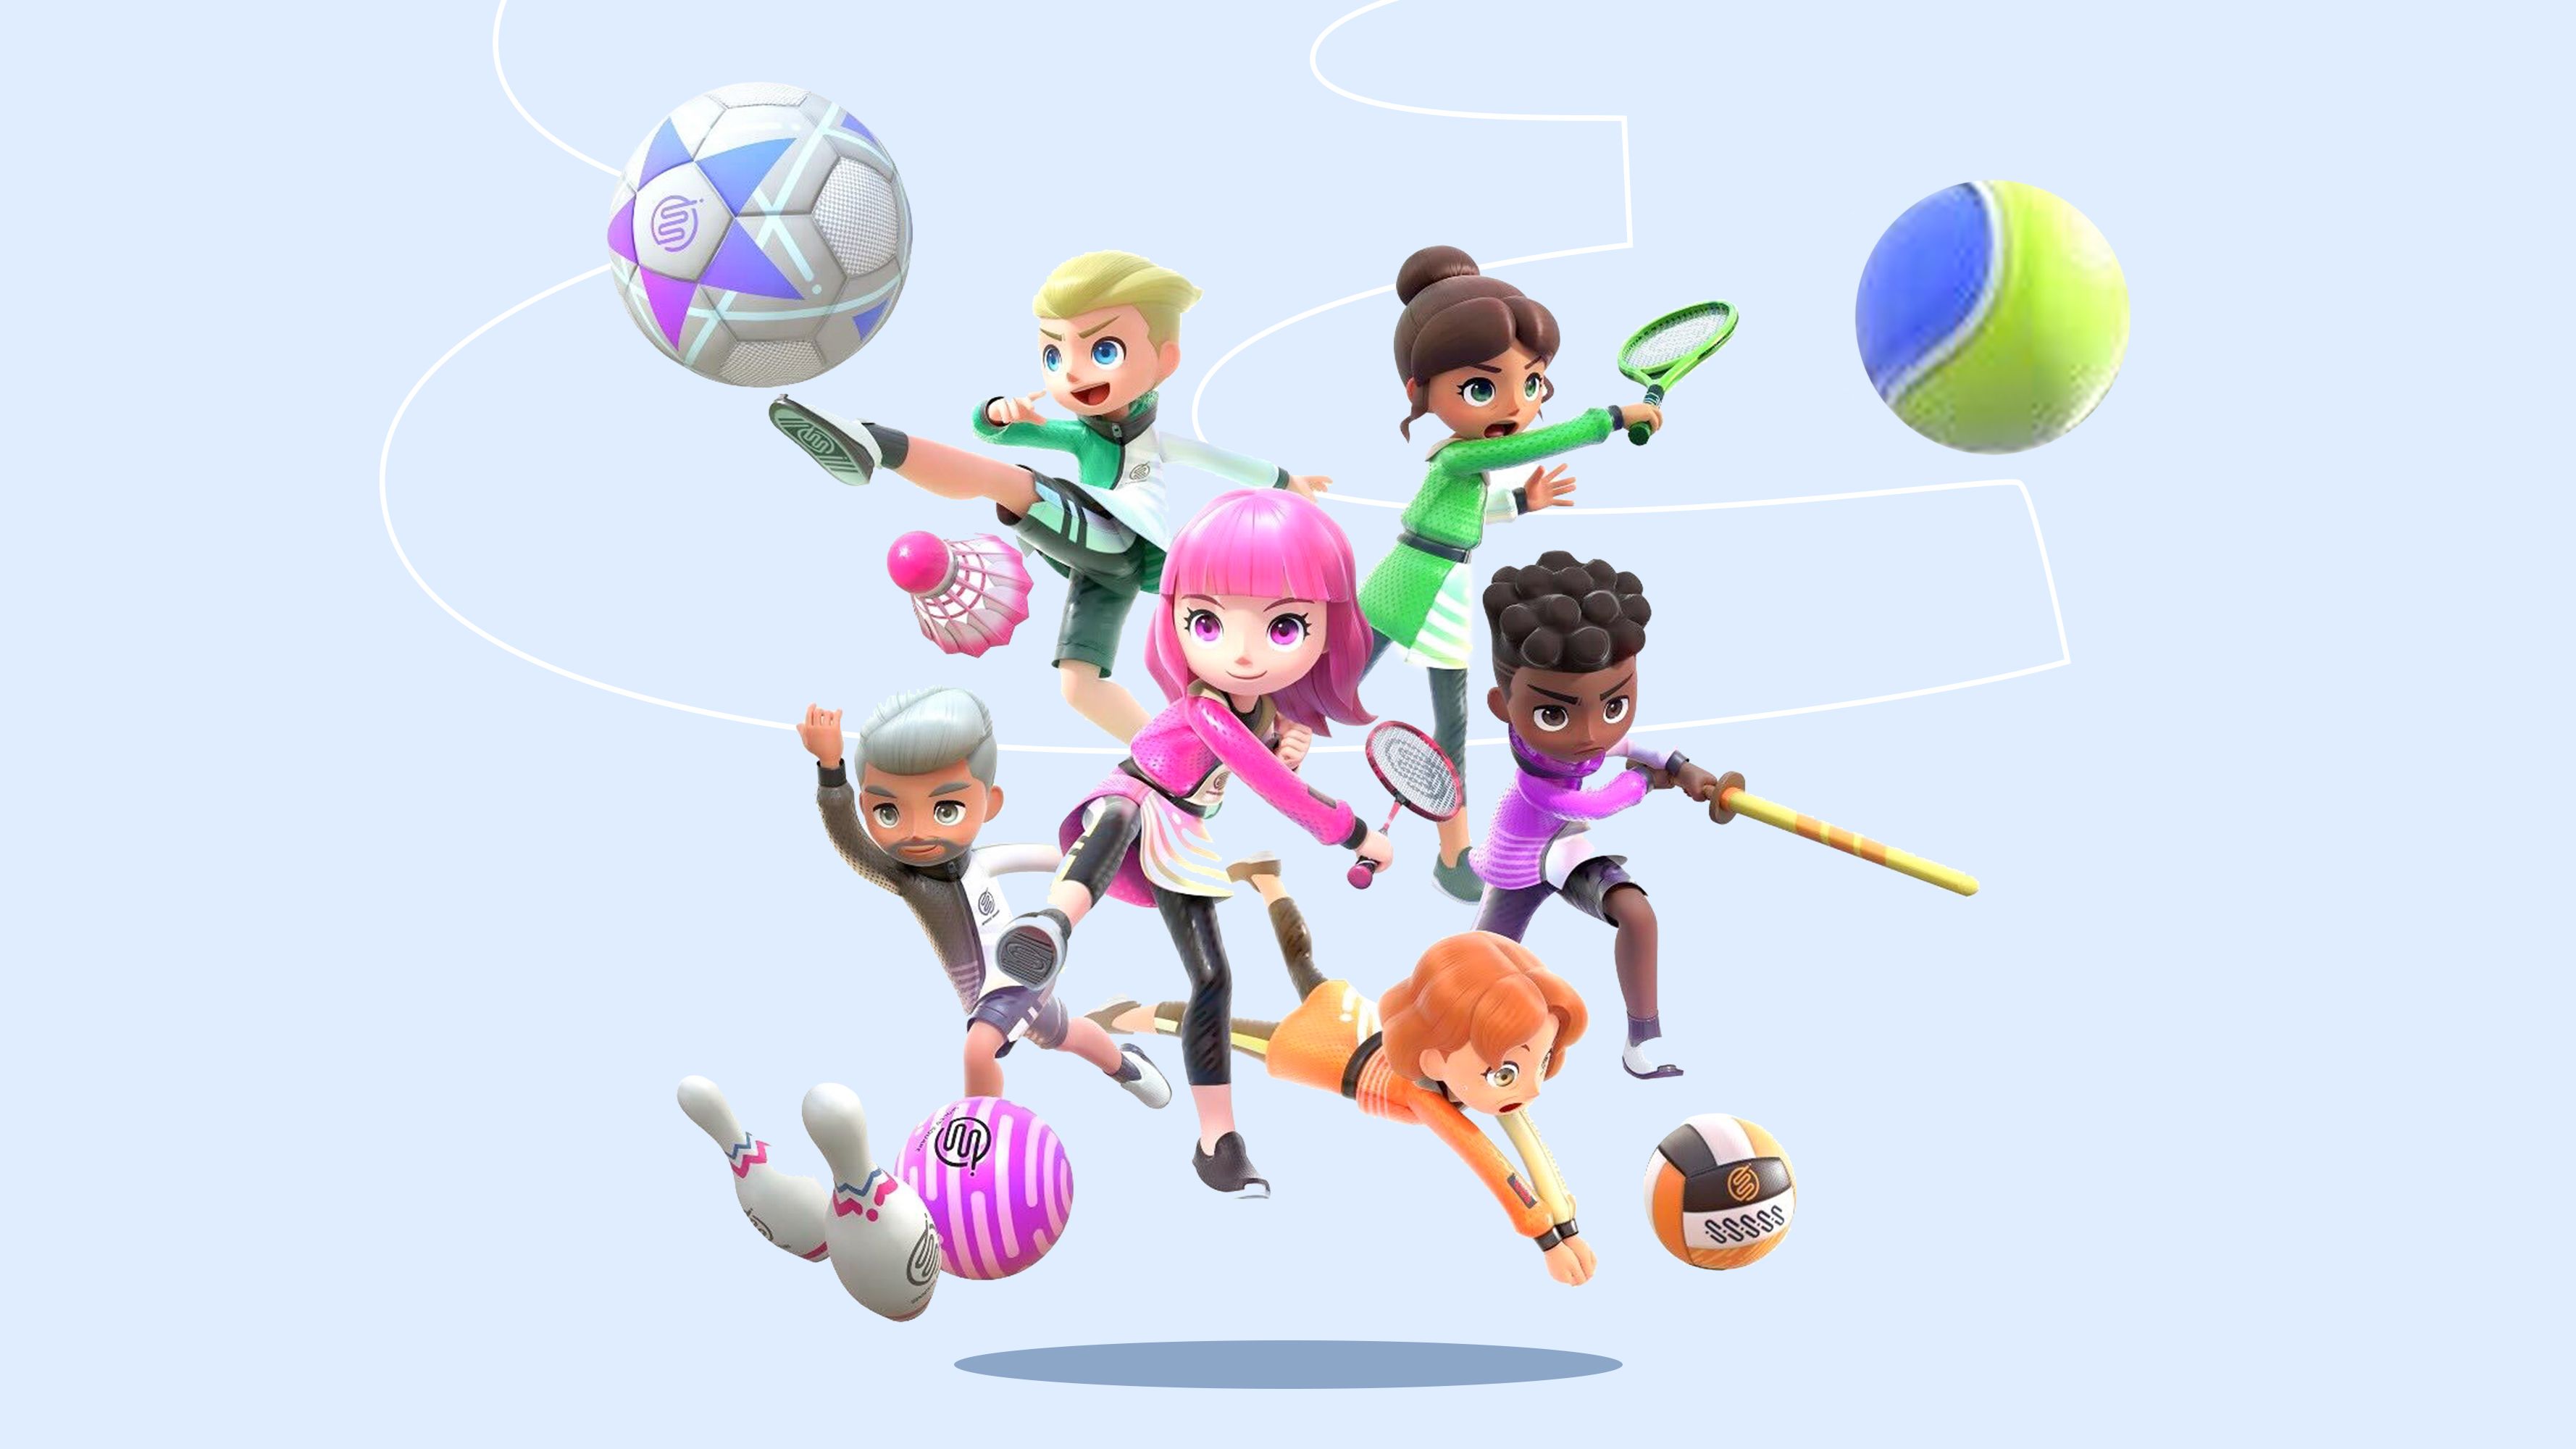 Wii Sports is coming back, sort of: Here's what to expect